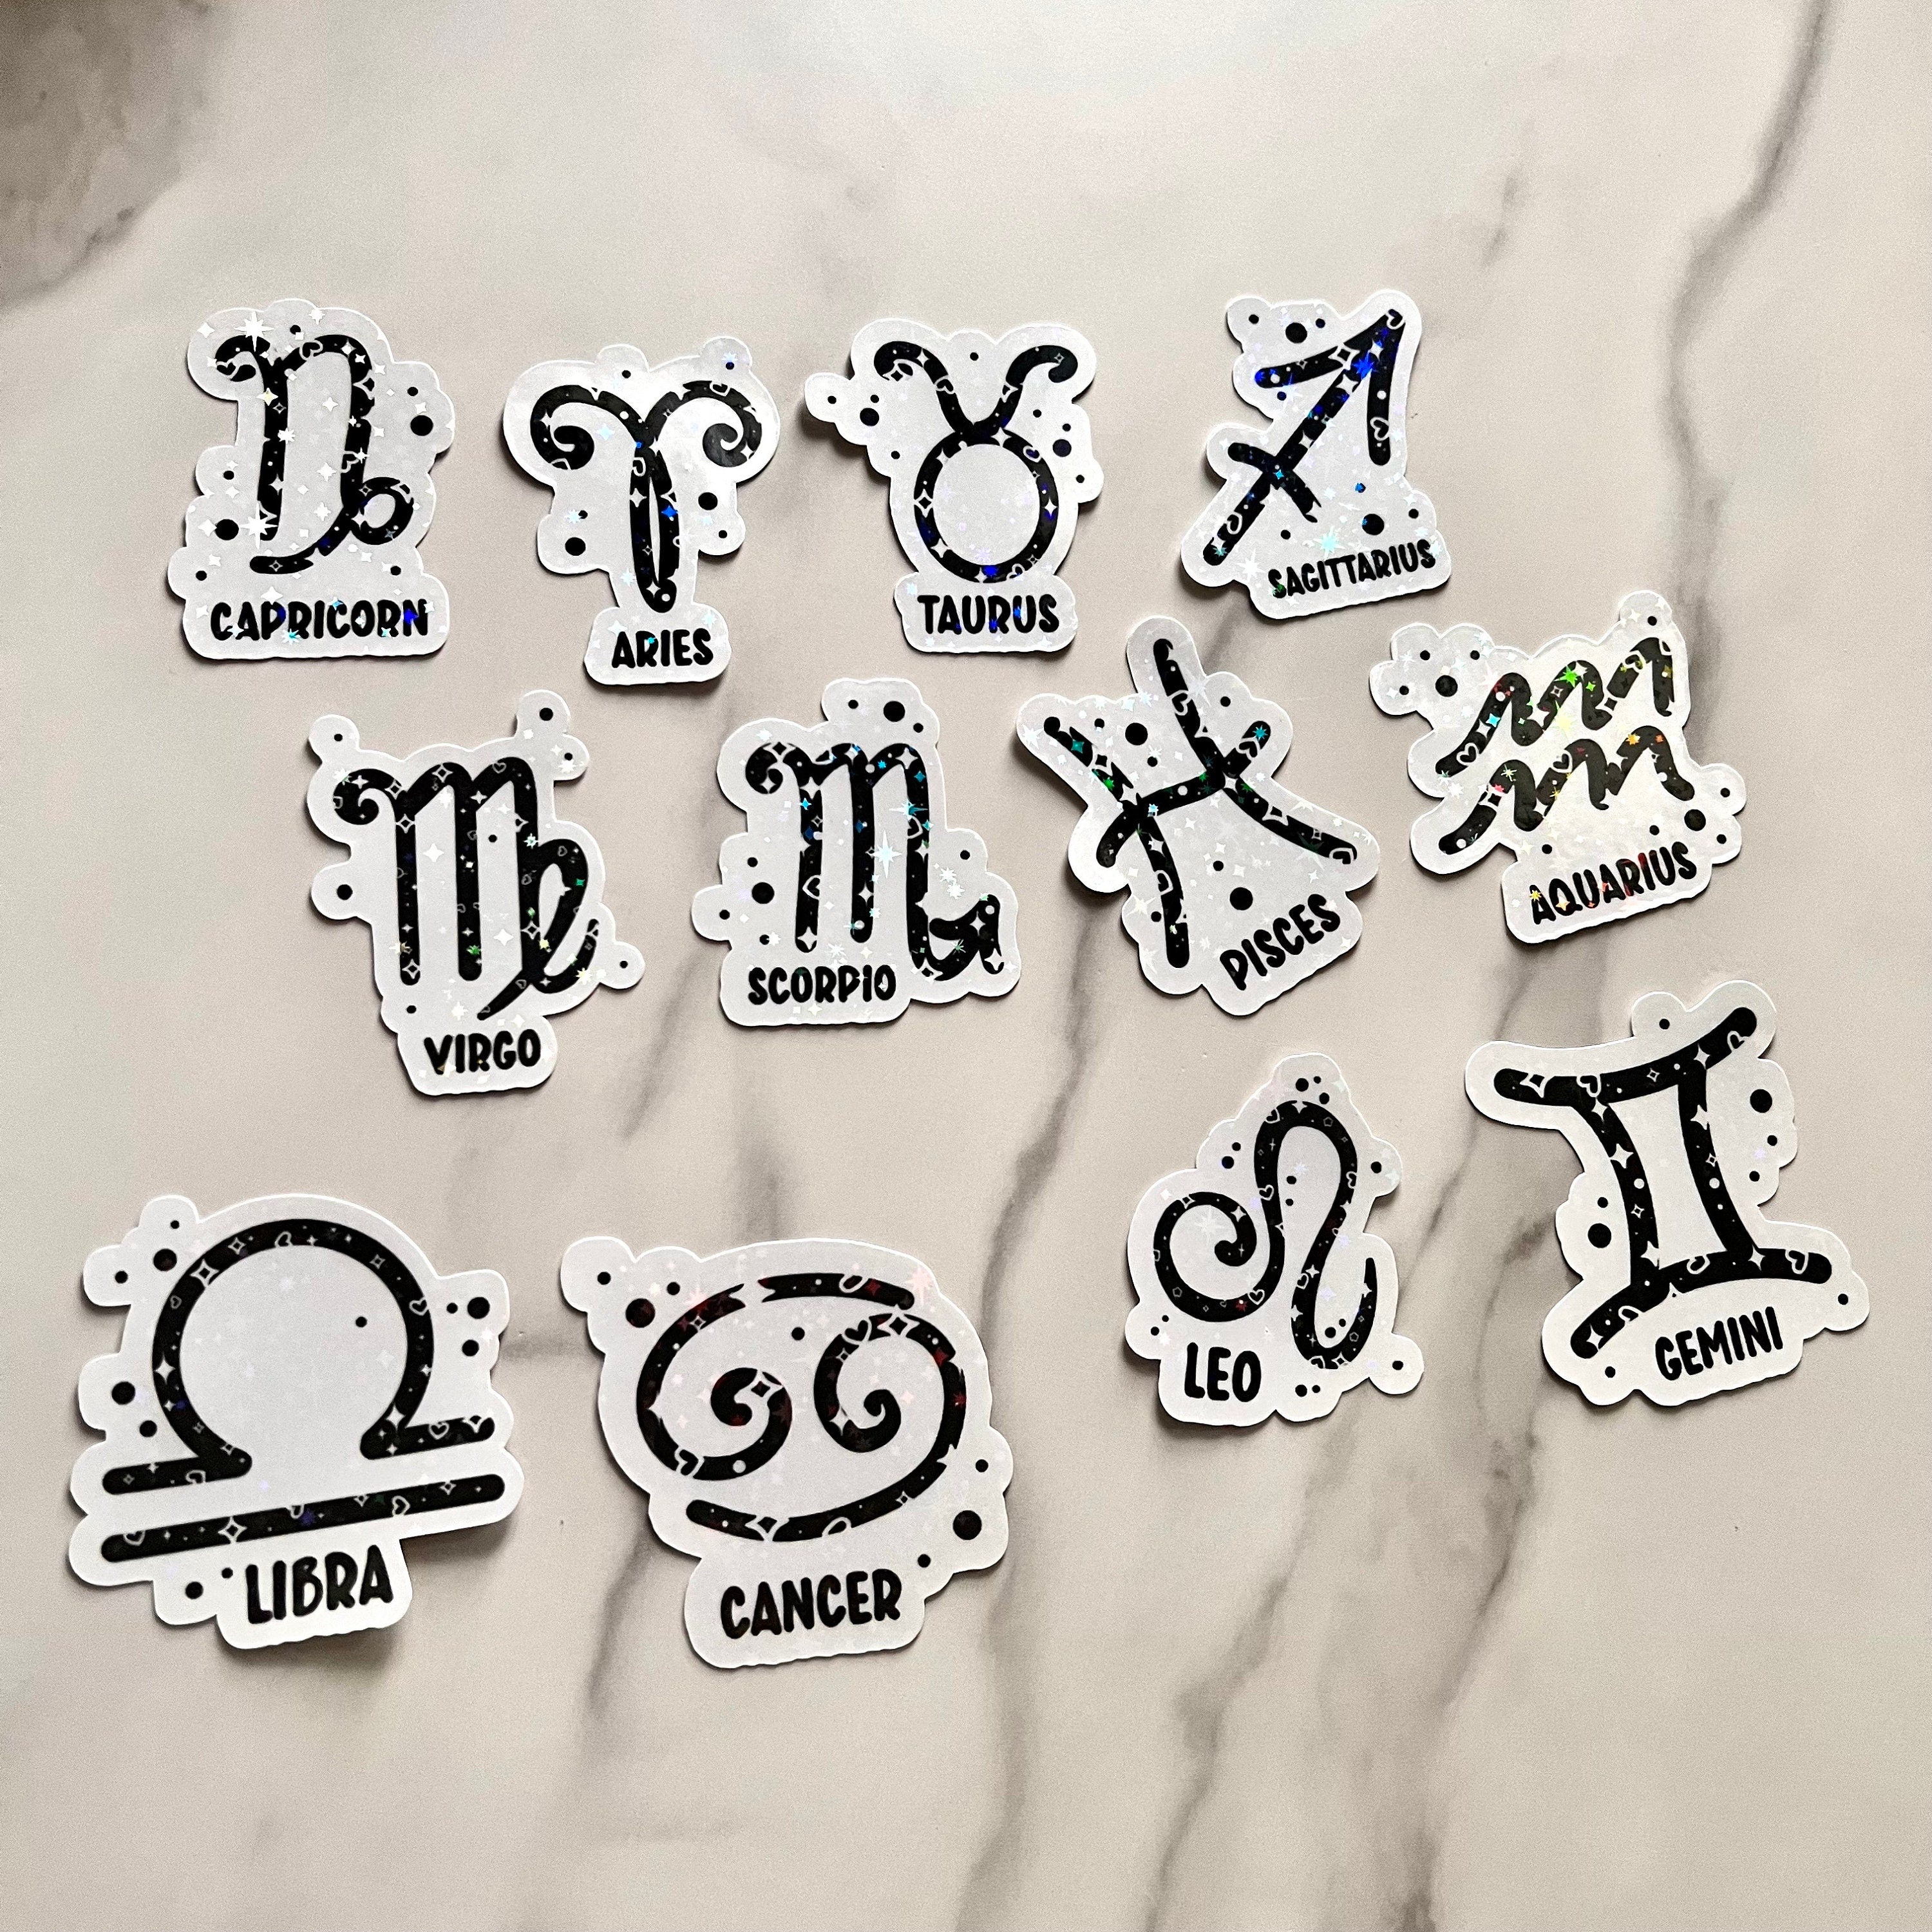 Zodiac Sticker Holographic 12 Star Sign, Black Vinyl, Witchy Tarot Horoscope, kindle stickers, laptop, die cut one piece sticker